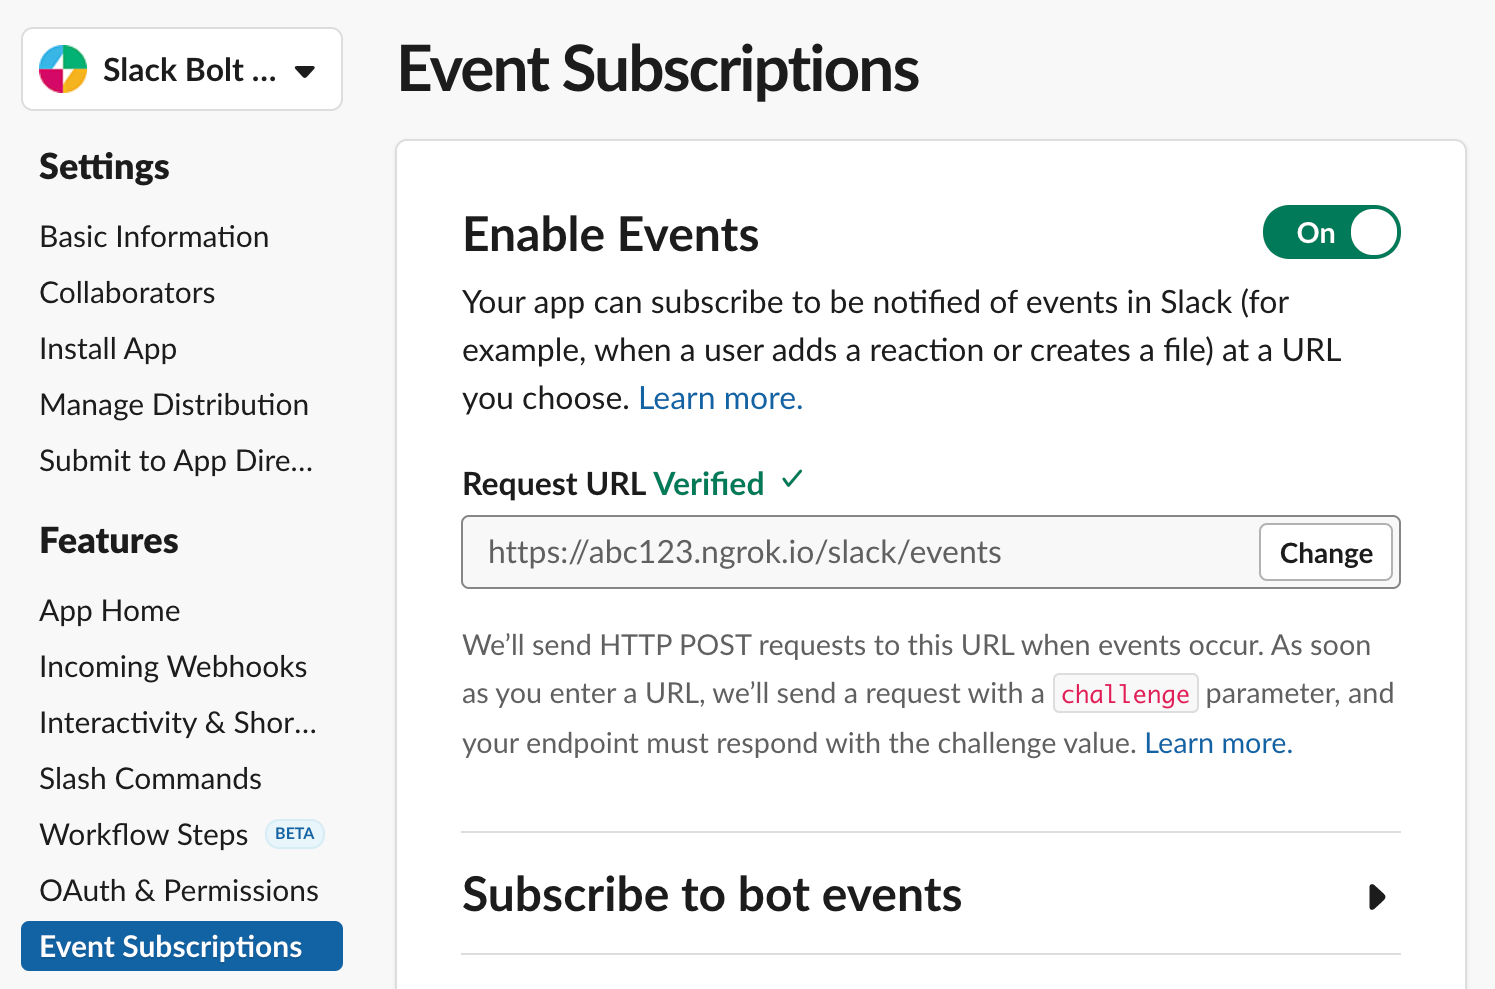 Event Subscriptions page